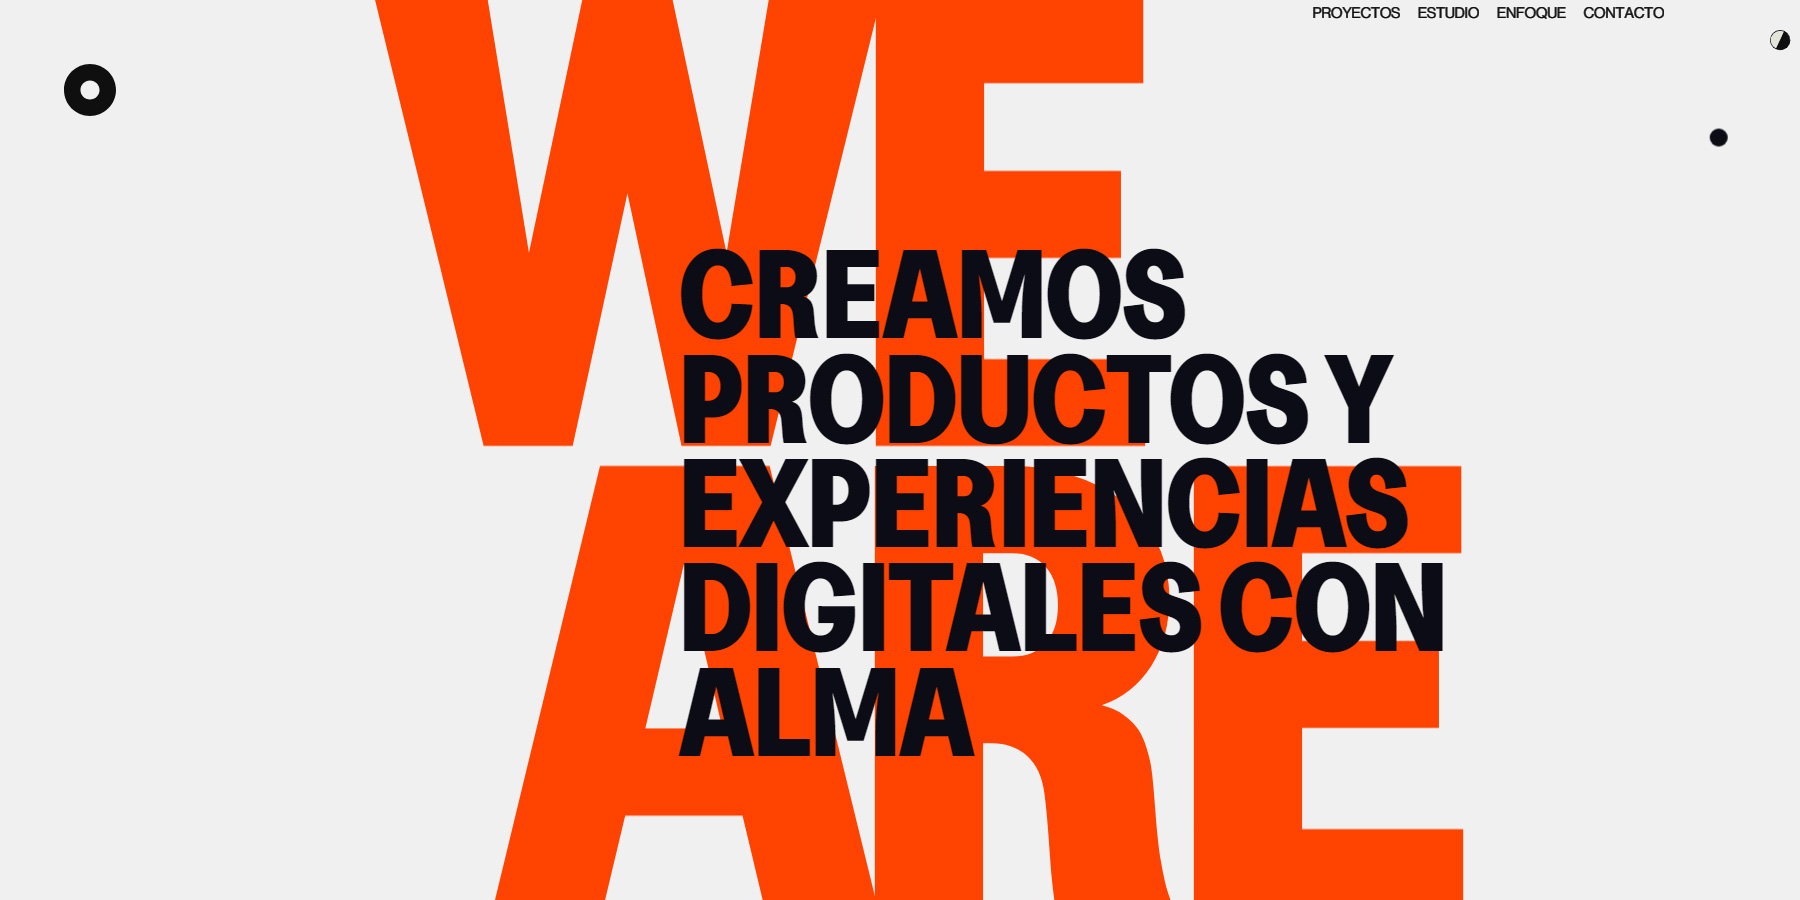 Dgrees - Website of the Day